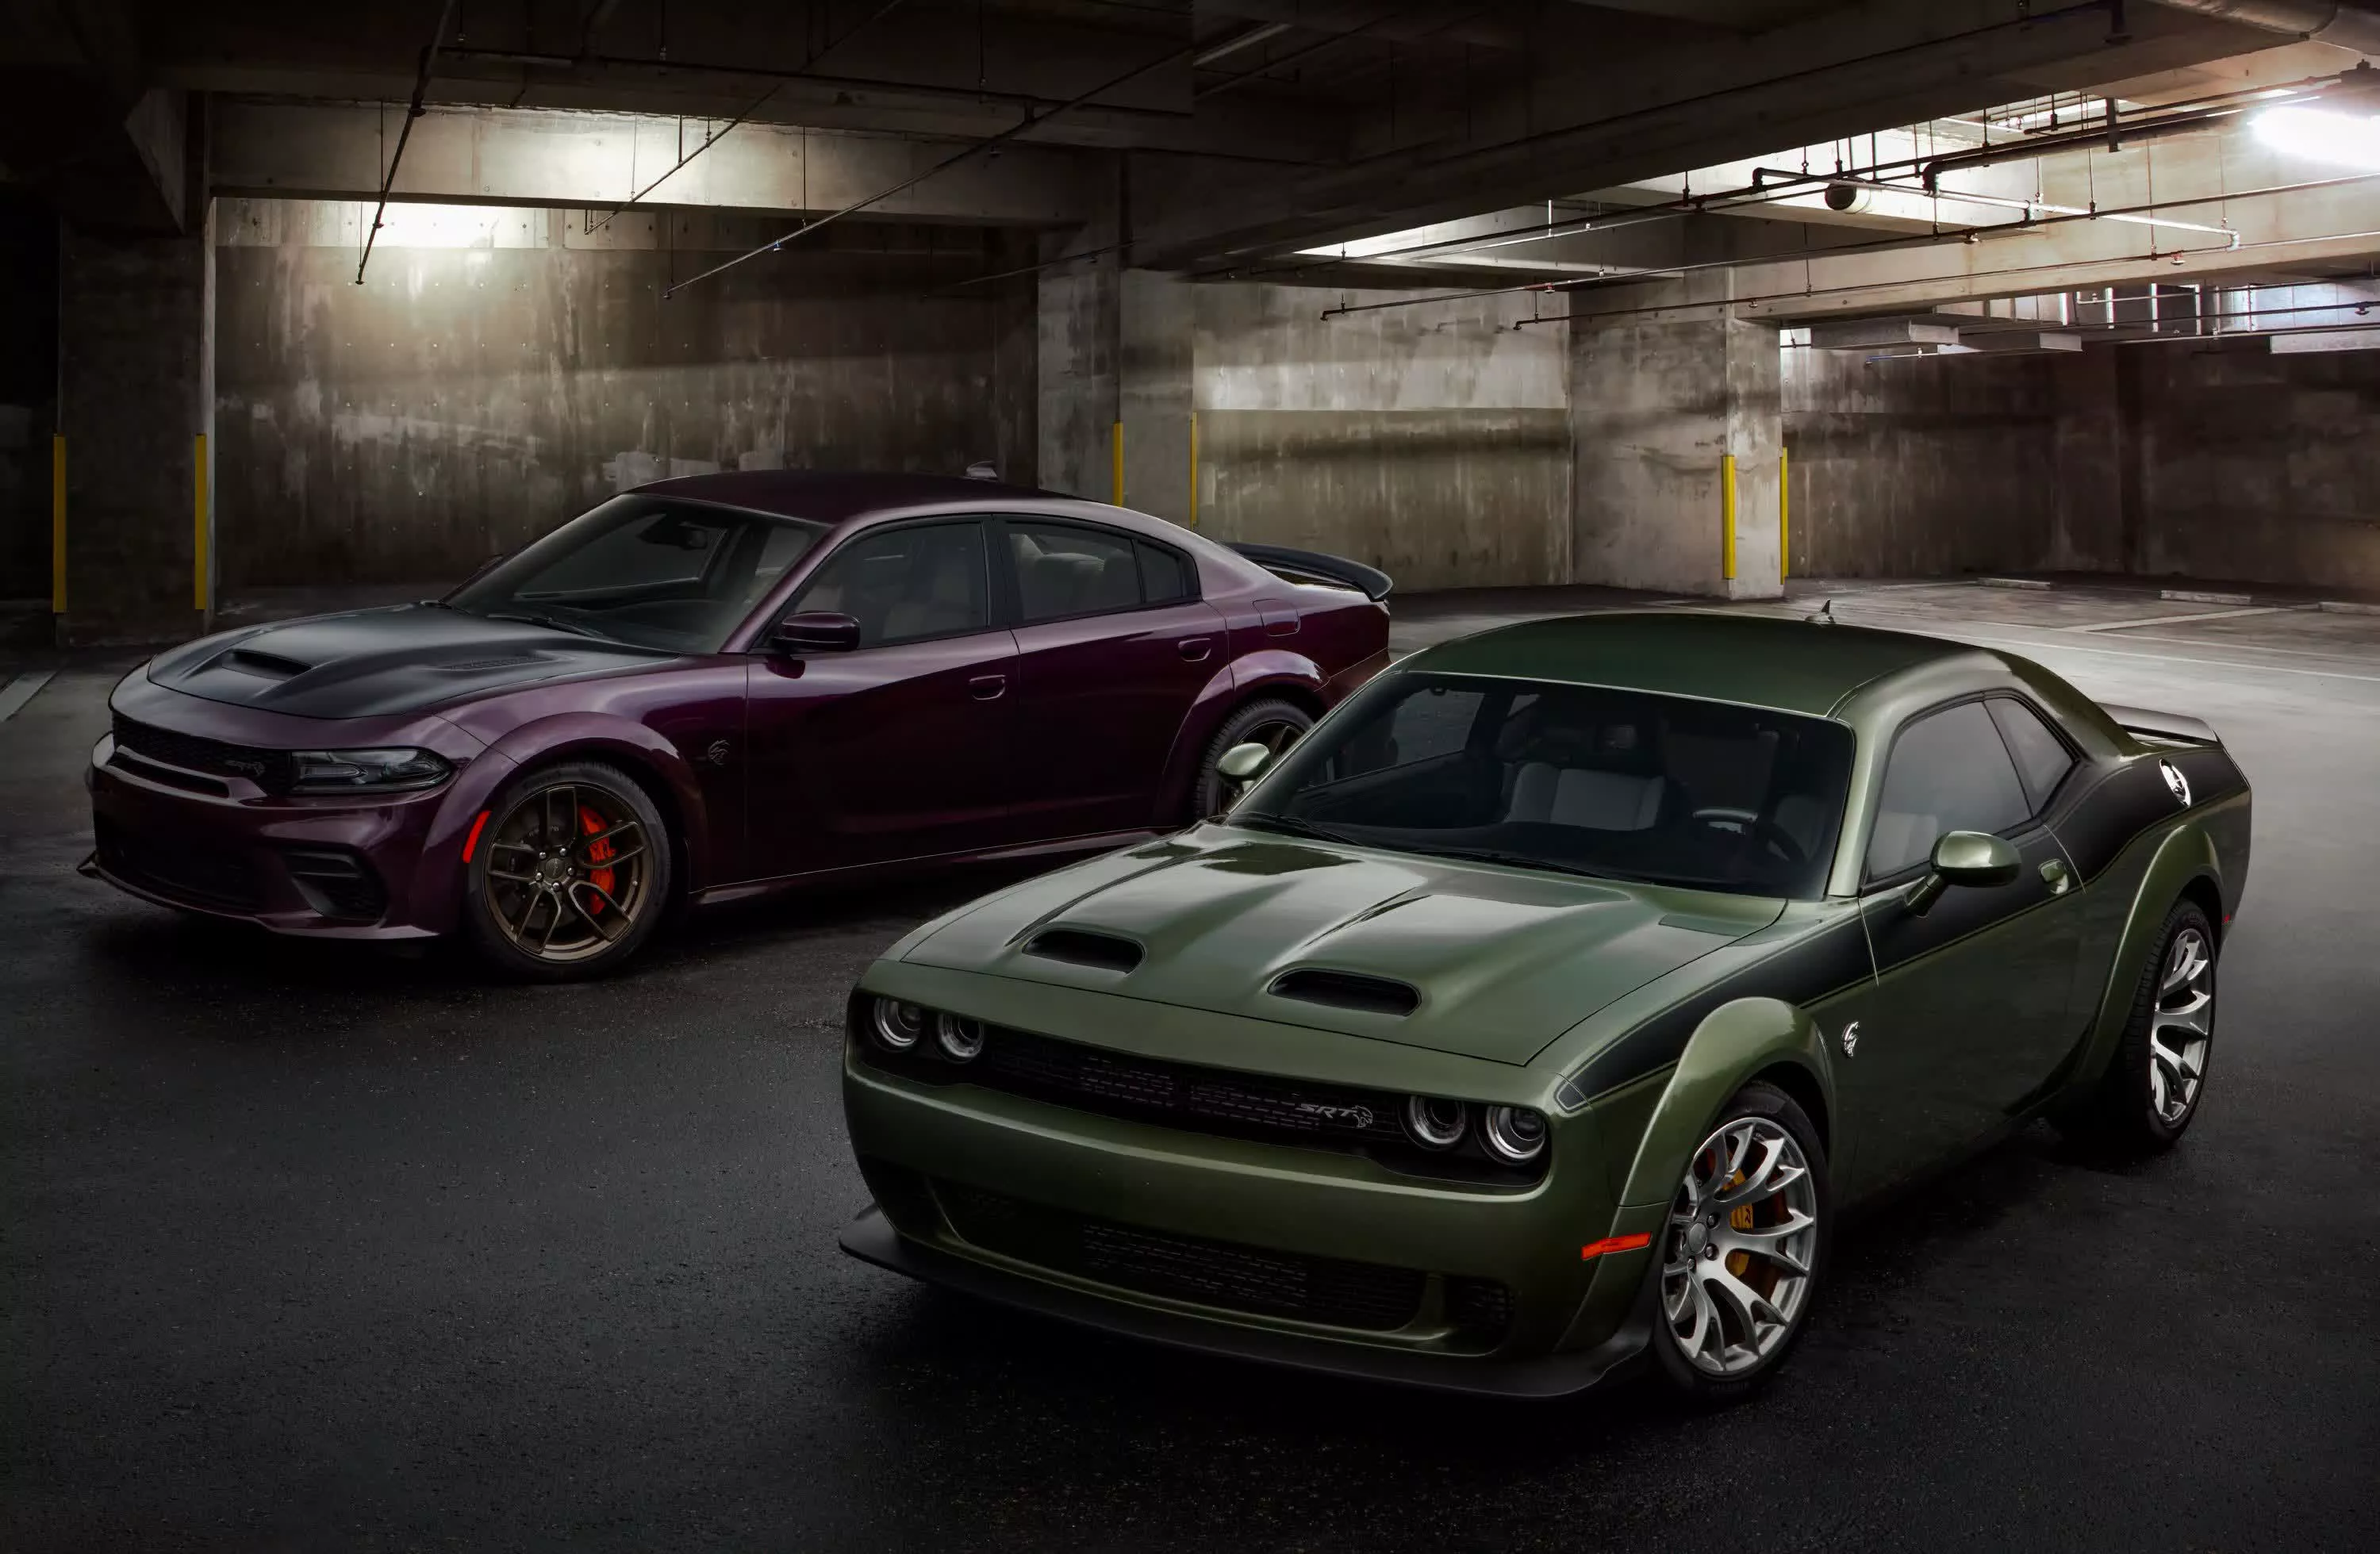 Dodge will end production of gas-powered Challenger and Charger muscle cars by 2024